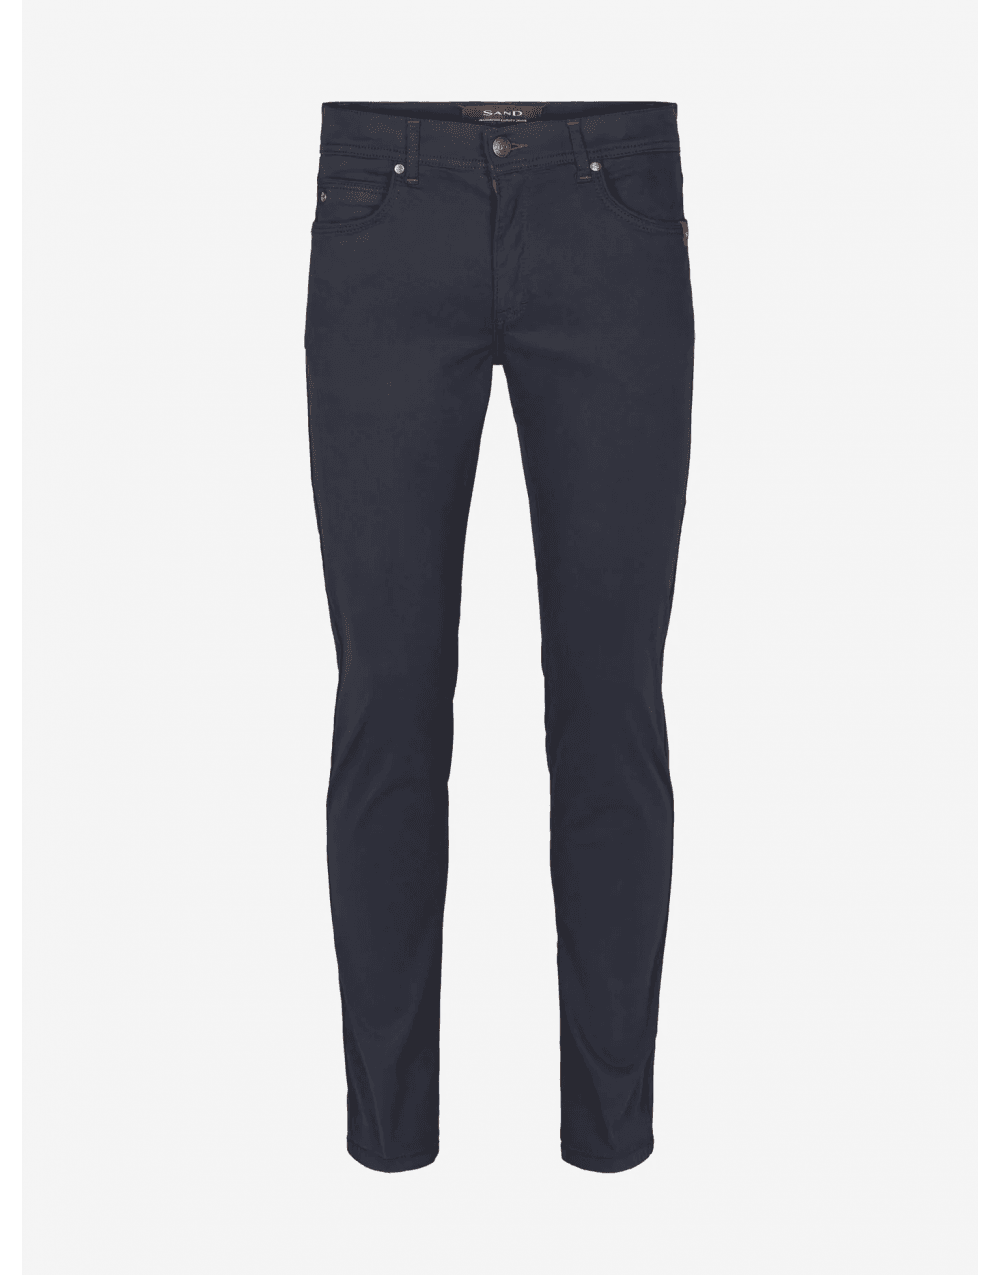 SAND Sand Burton Suede Touch Trousers Col: 590 Navy, Size: 34/34